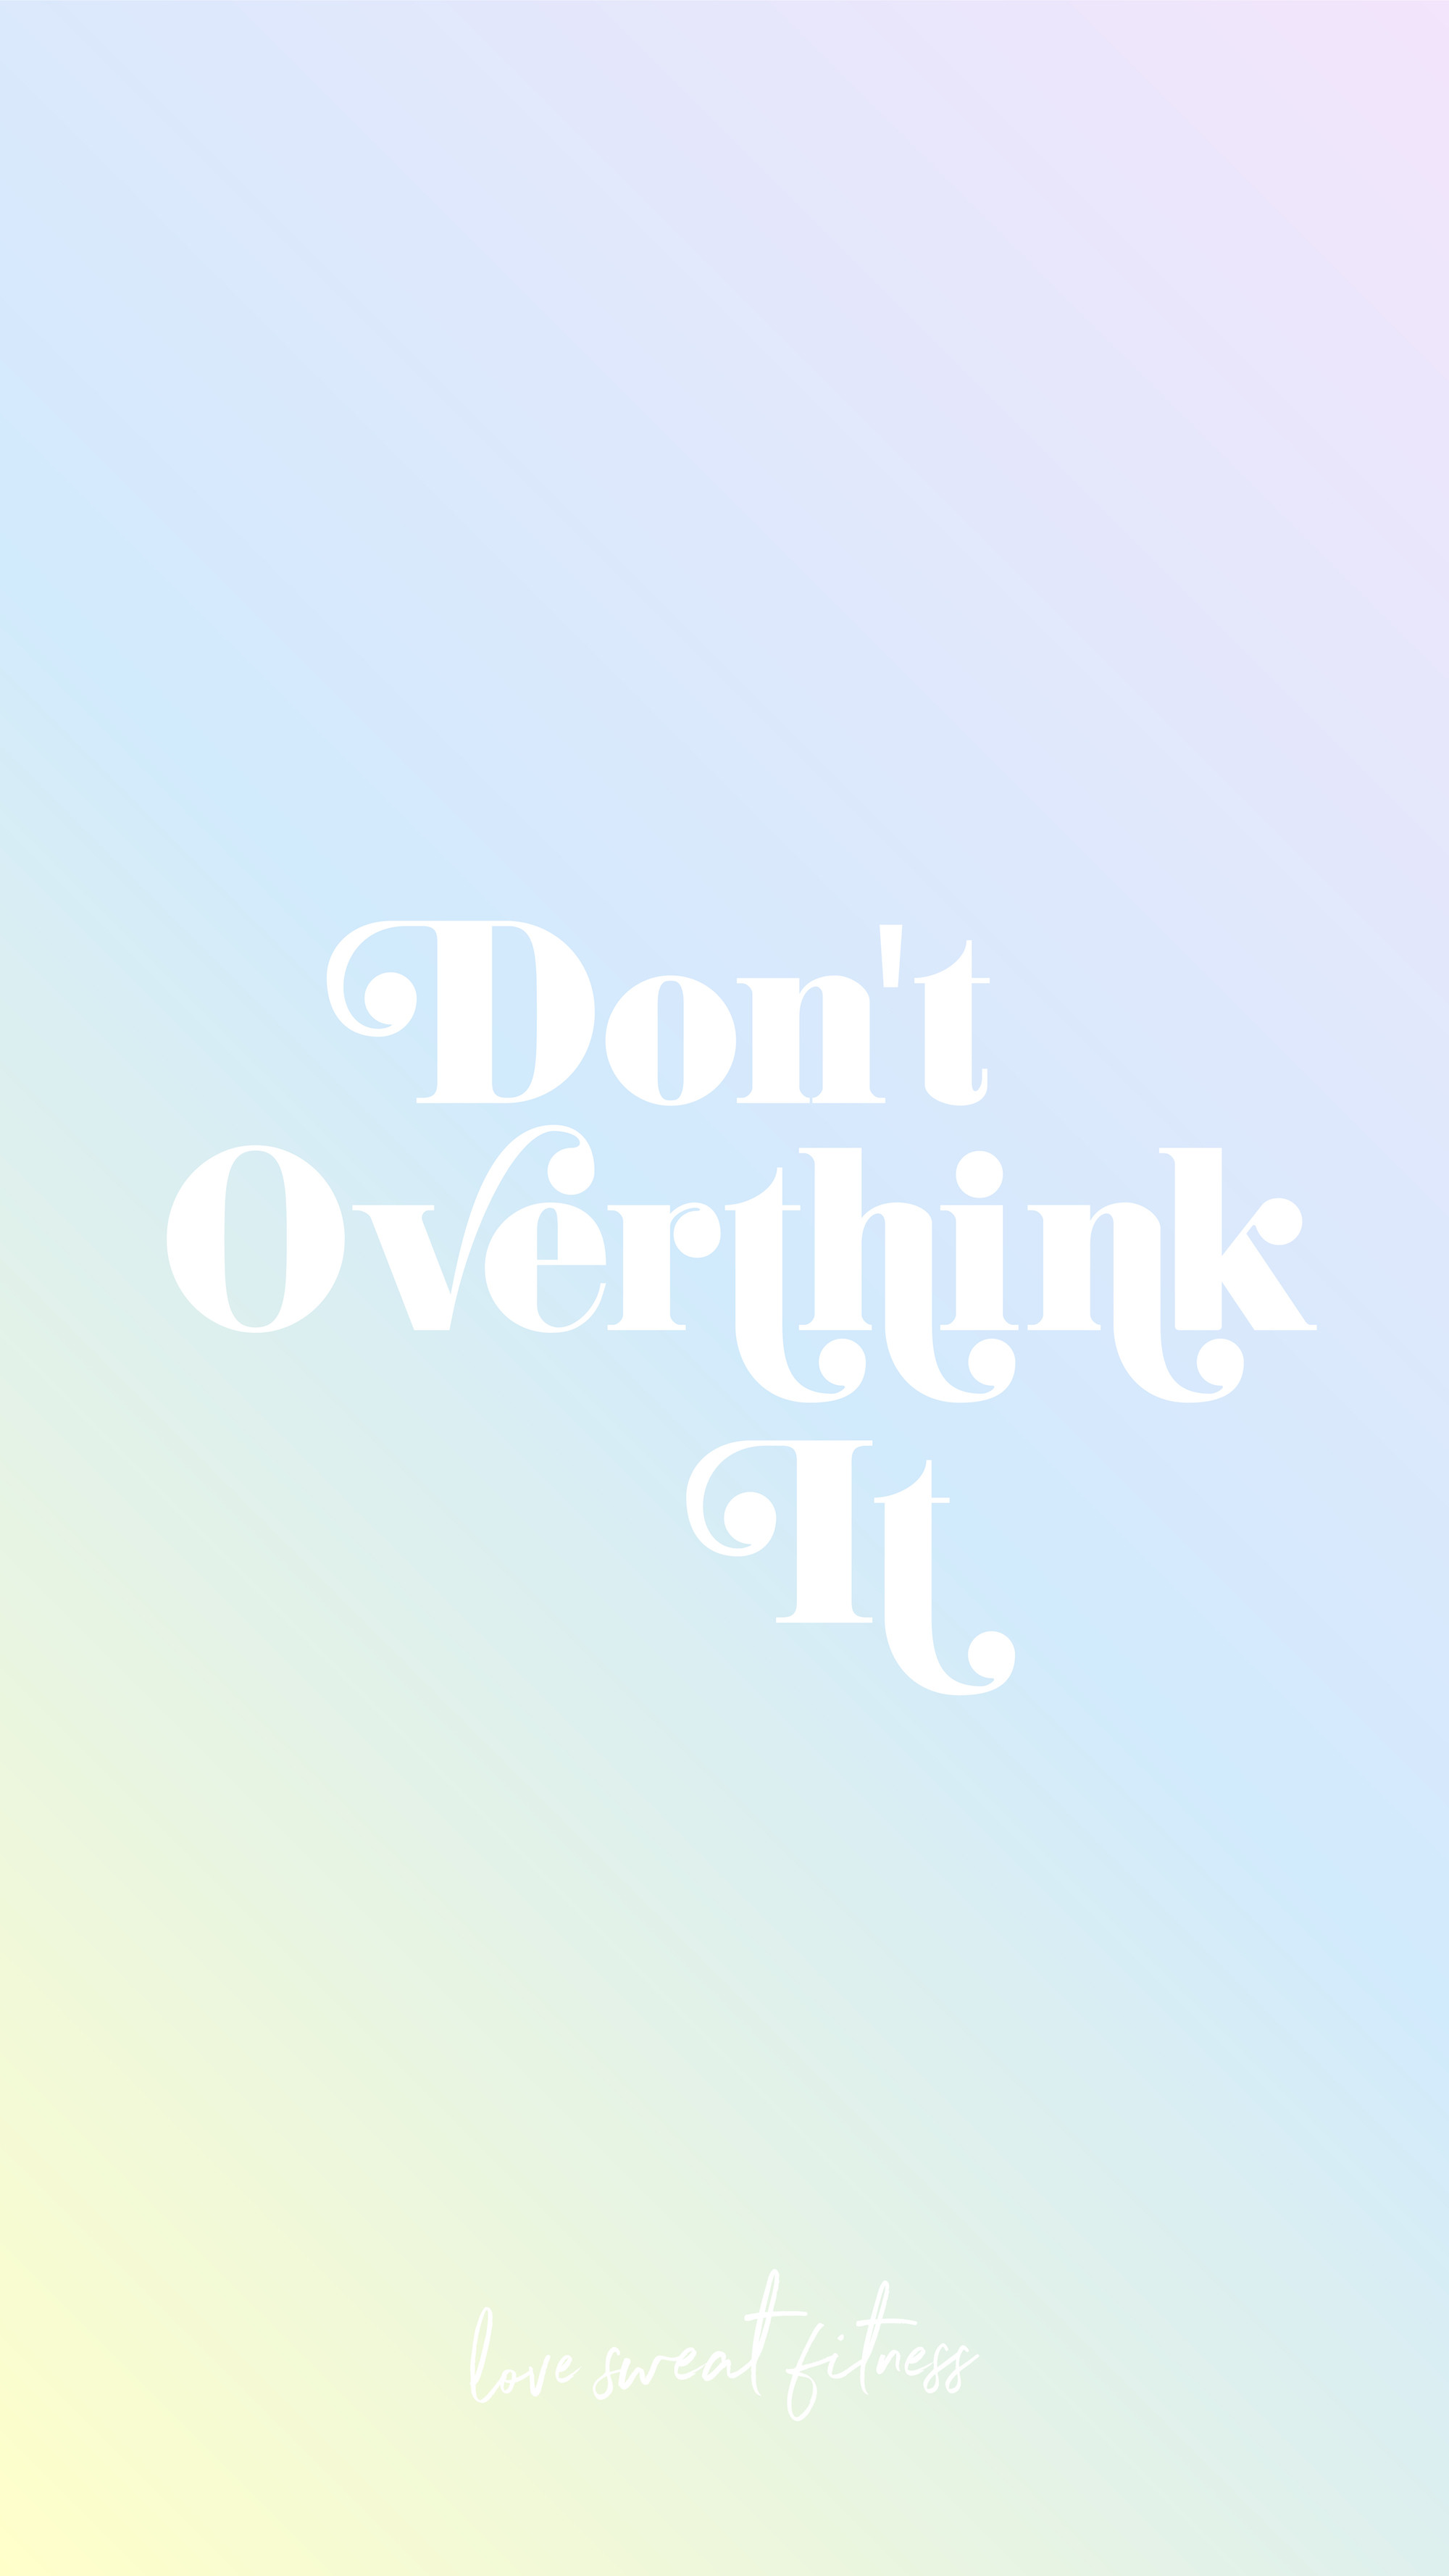 2000x3556 cute phone wallpaper, phone background, motivational quote, vintage phone  wallpaper